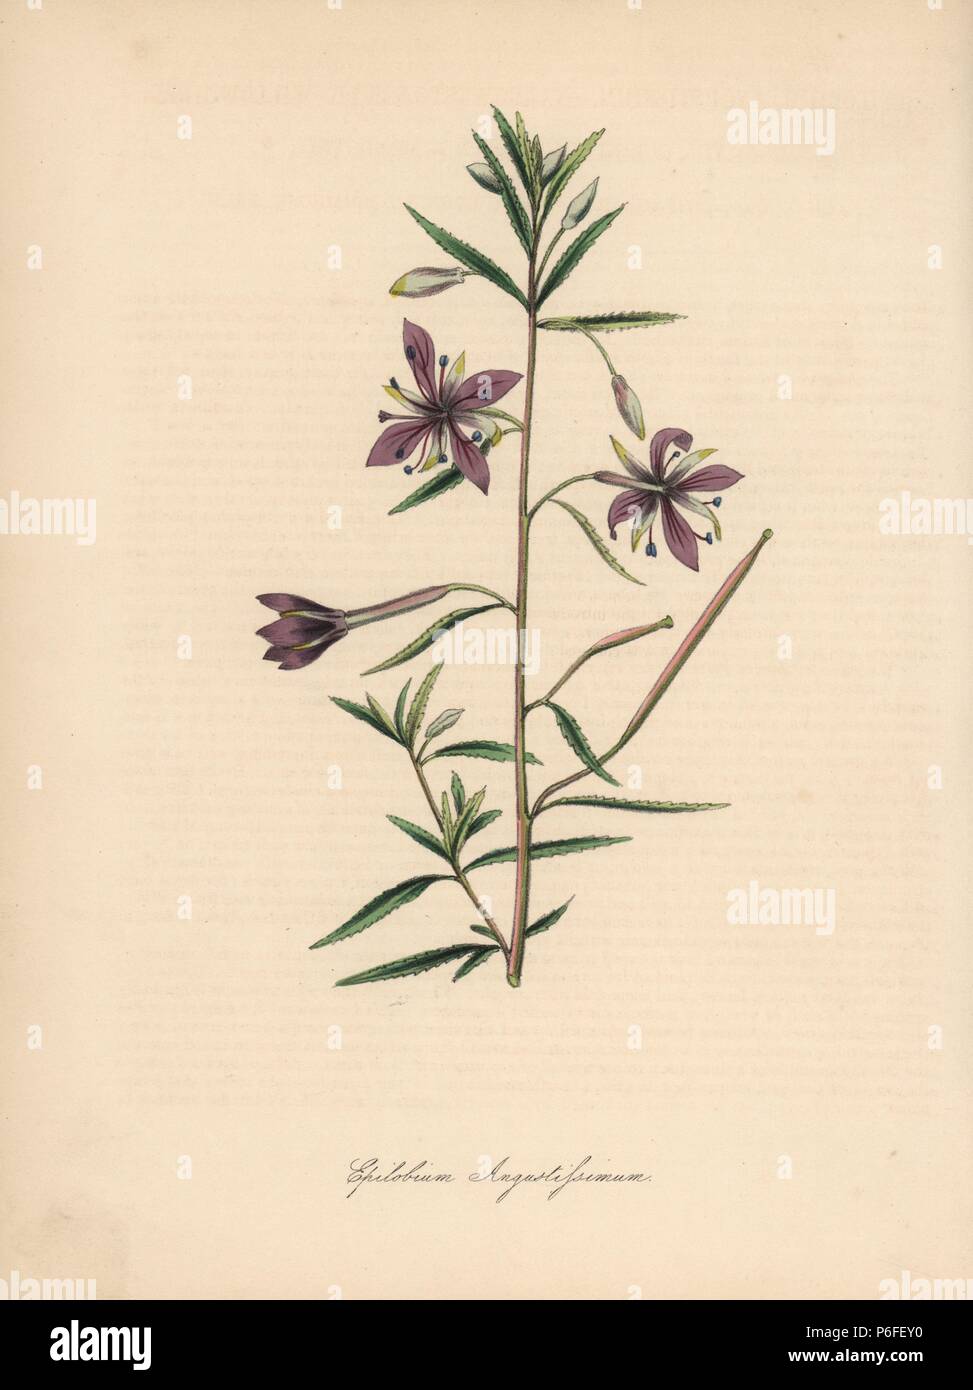 Willowherb, Epilobium dodonaei (Epilobium angustissimum). Handcoloured zincograph by C. Chabot drawn by Miss M. A. Burnett from her 'Plantae Utiliores: or Illustrations of Useful Plants,' Whittaker, London, 1842. Miss Burnett drew the botanical illustrations, but the text was chiefly by her late brother, British botanist Gilbert Thomas Burnett (1800-1835). Stock Photo